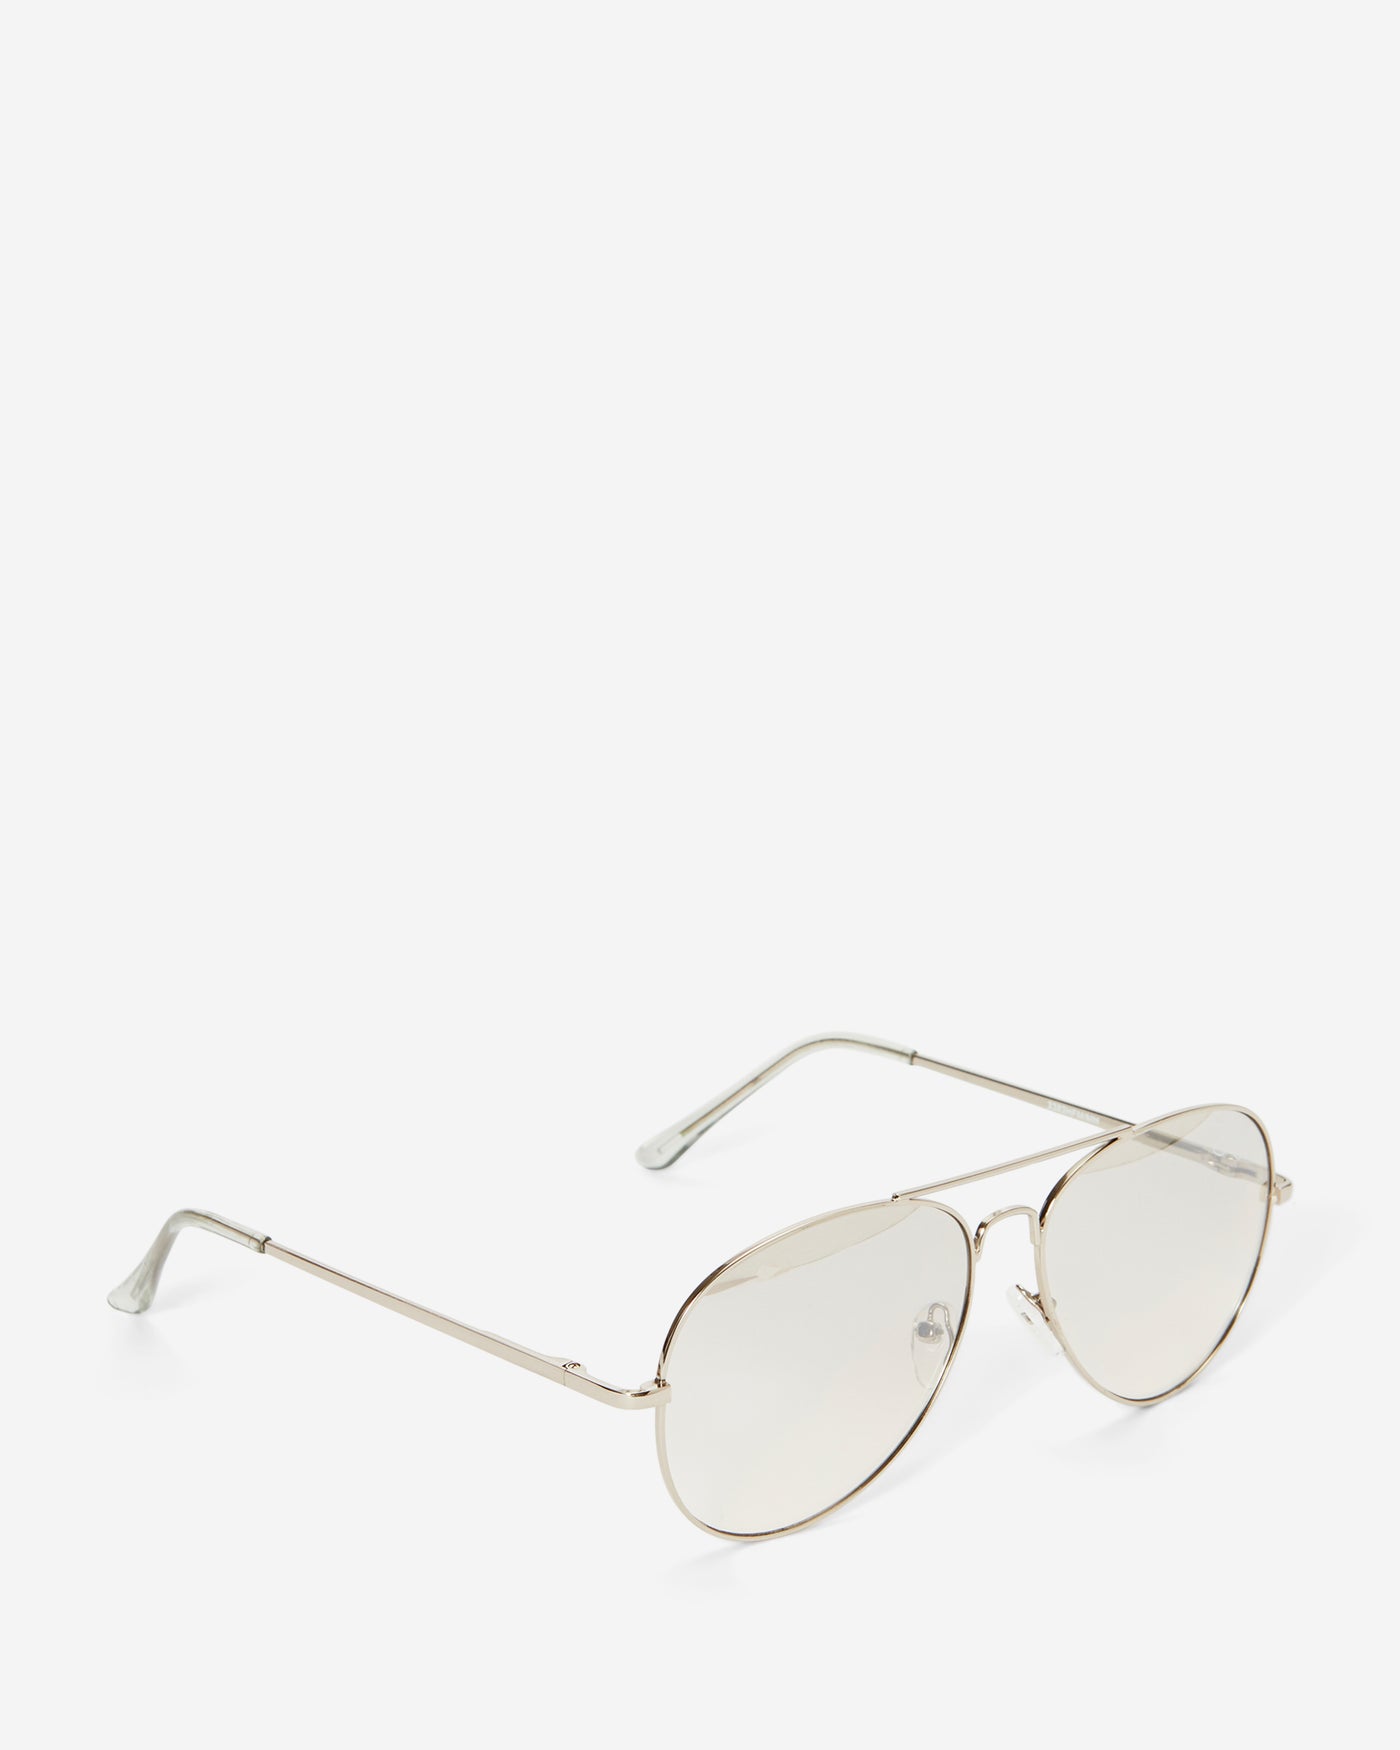 Classic Aviator Sunglasses - Light Gold Metal Frame with Clear Smoke Lens Sunglasses Joey James, The Label   